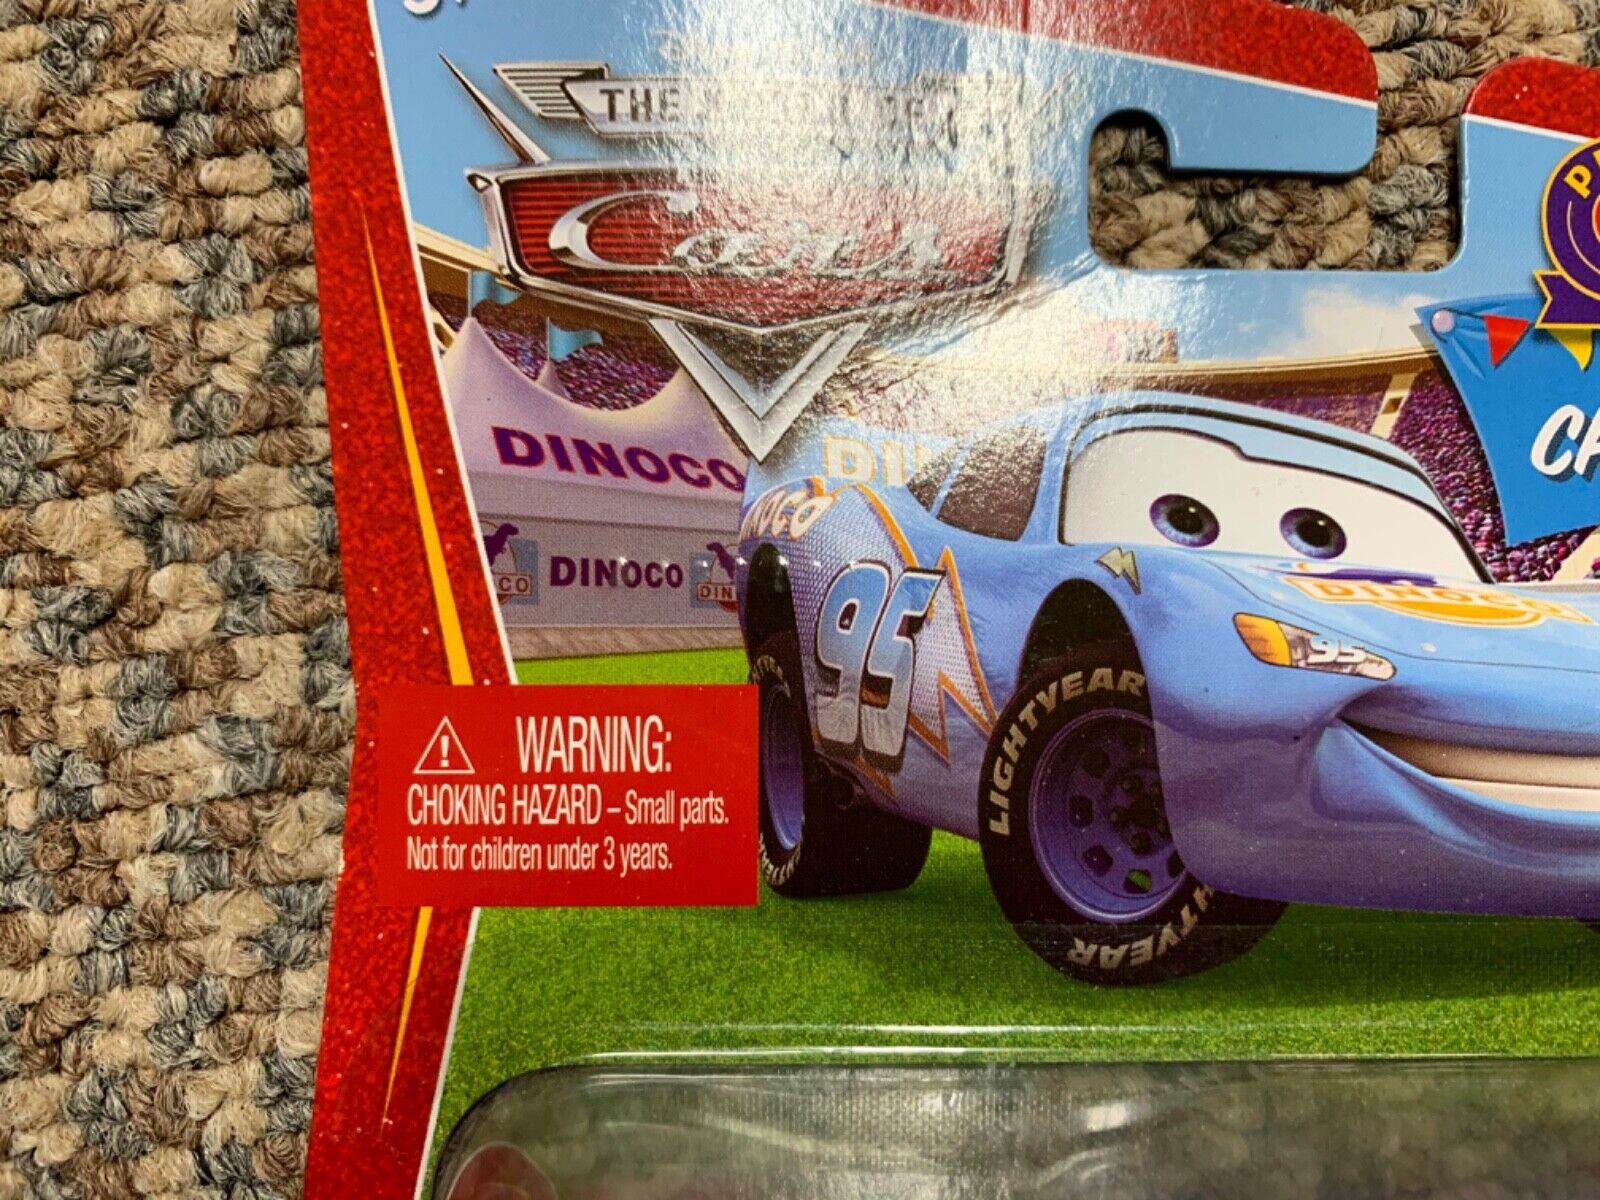 Disney Pixar Cars The World of Cars Dinoco Lightning McQueen w Piston Cup Chase